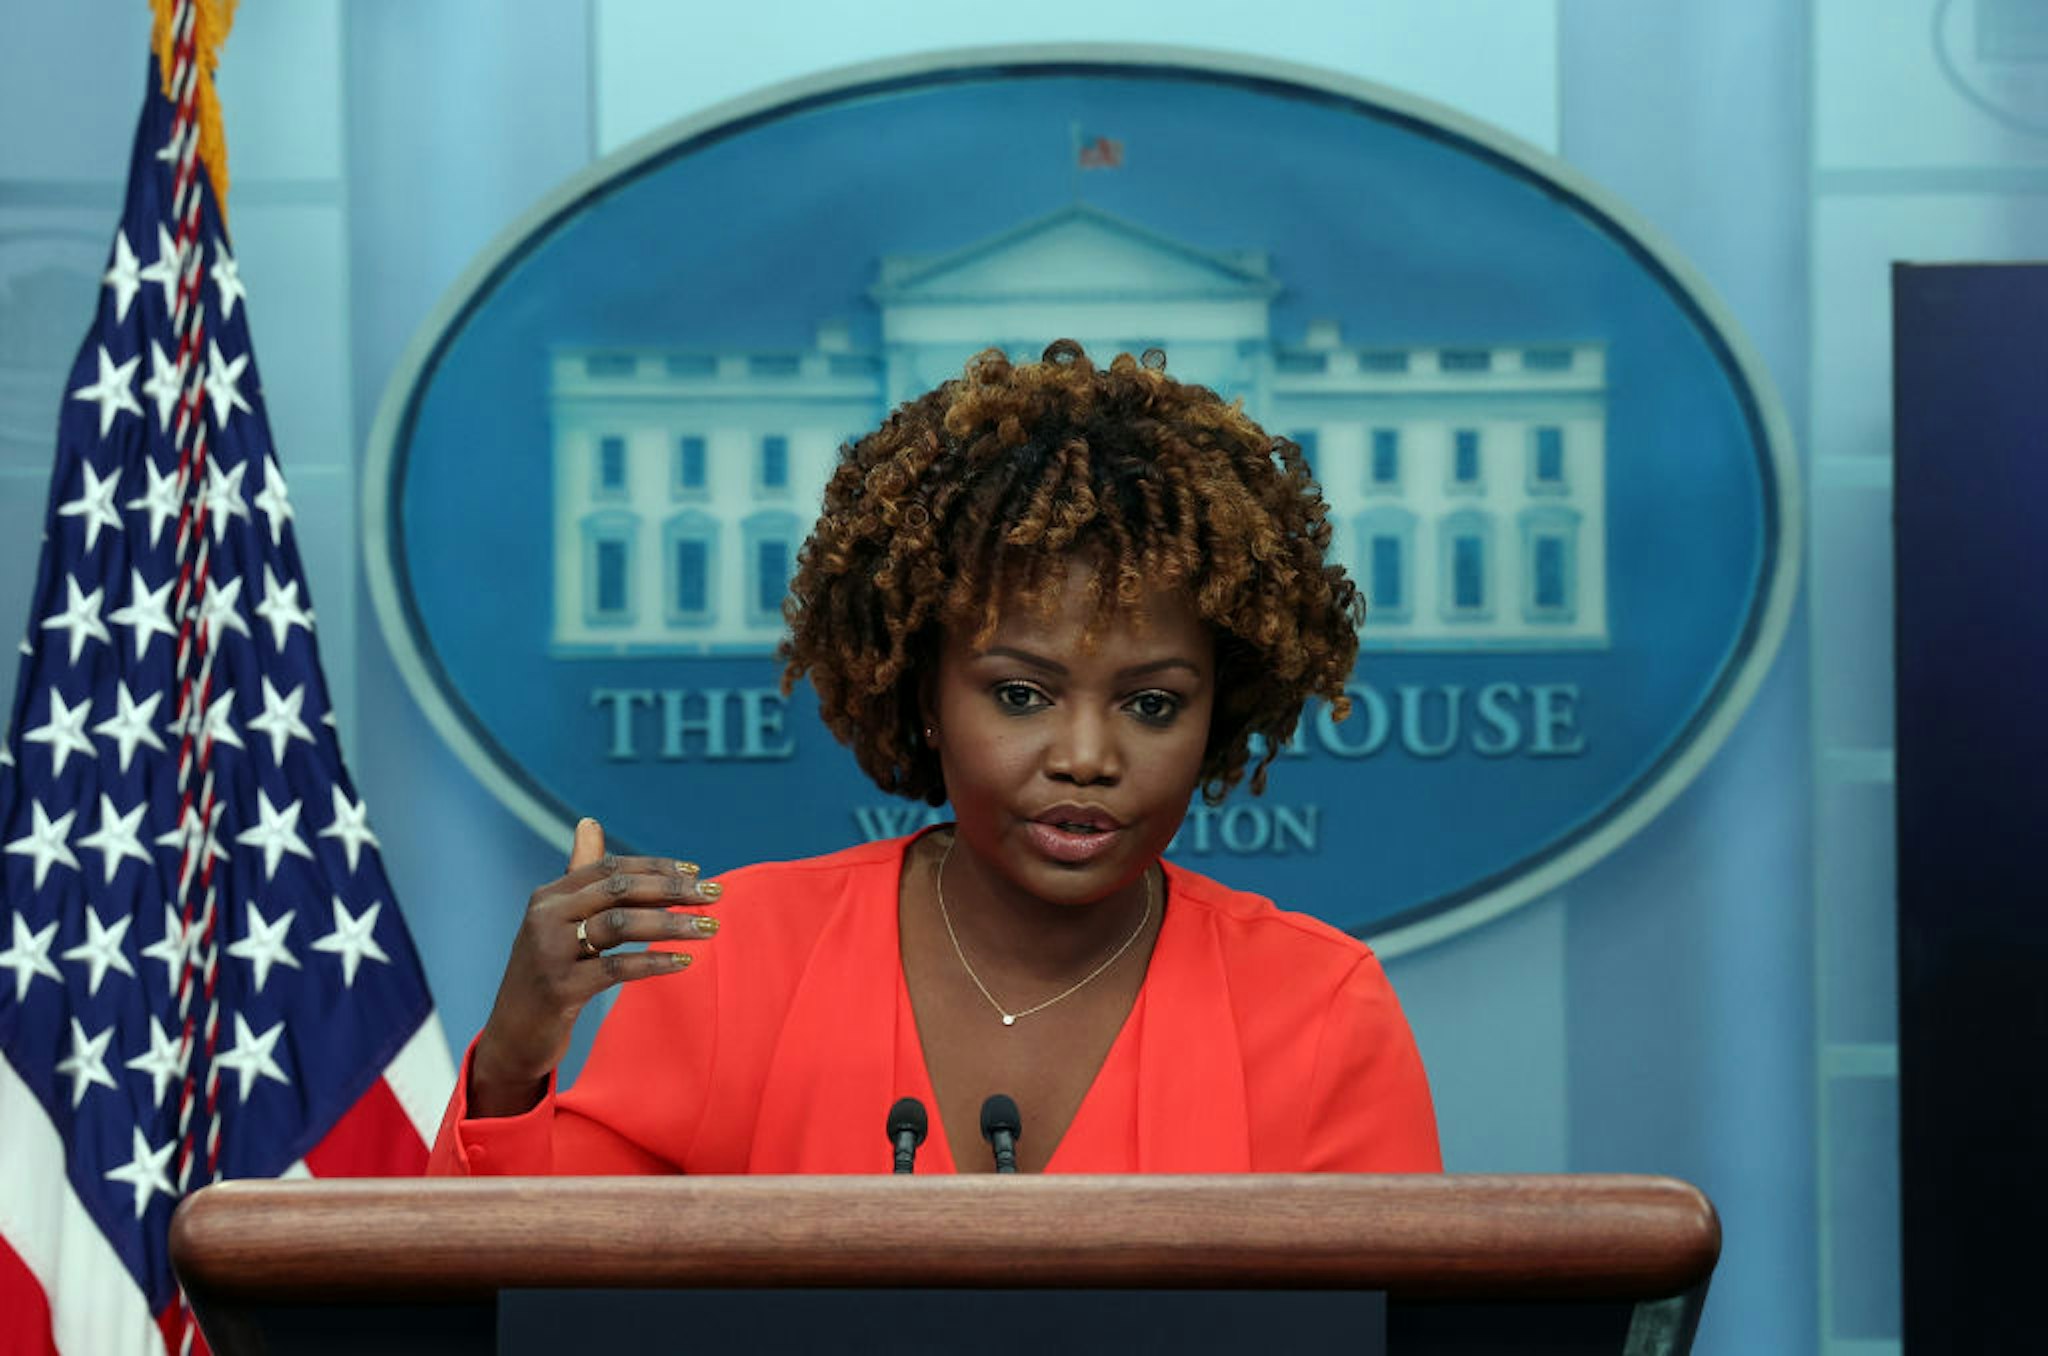 WASHINGTON, DC - JANUARY 11: White House Press Secretary Karine Jean-Pierre speaks during a press briefing at the White House on January 11, 2023 in Washington, DC. Jean-Pierre spoke on the classified documents found at a think tank office formerly used by President Joe Biden and the ongoing Russian invasion of Ukraine.